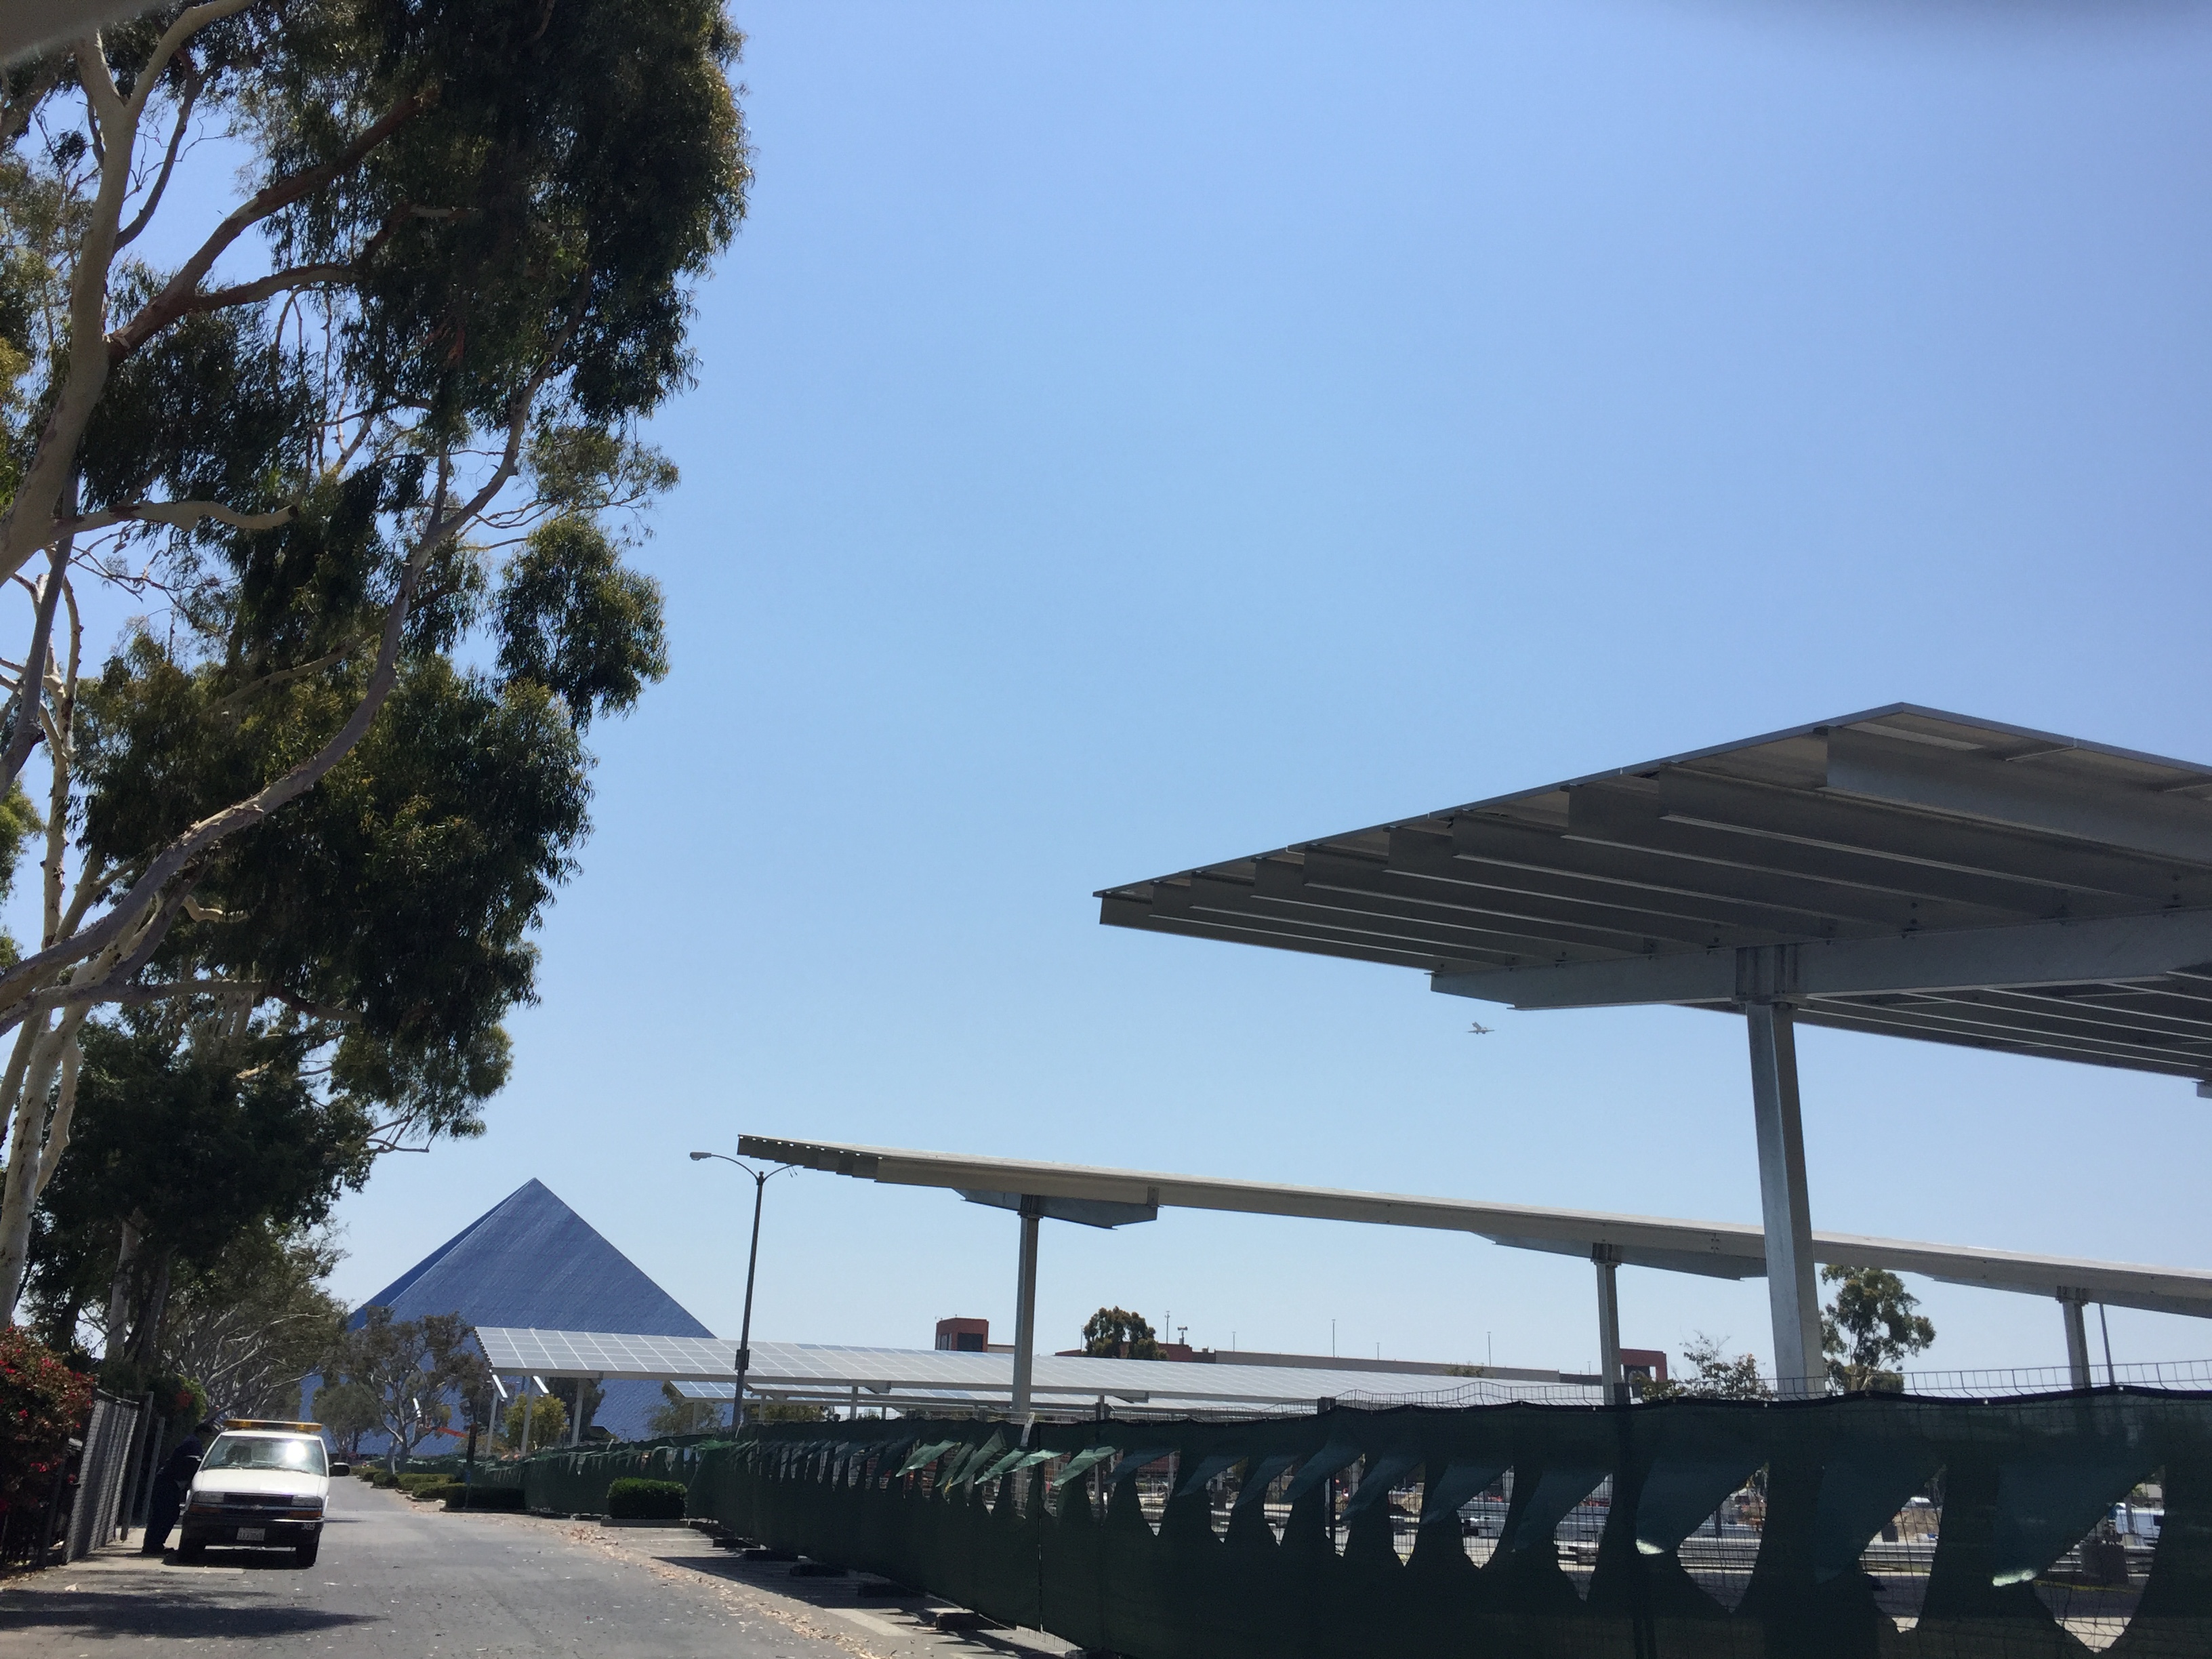 solar panel installation in parking lot 14 with pyramid in t